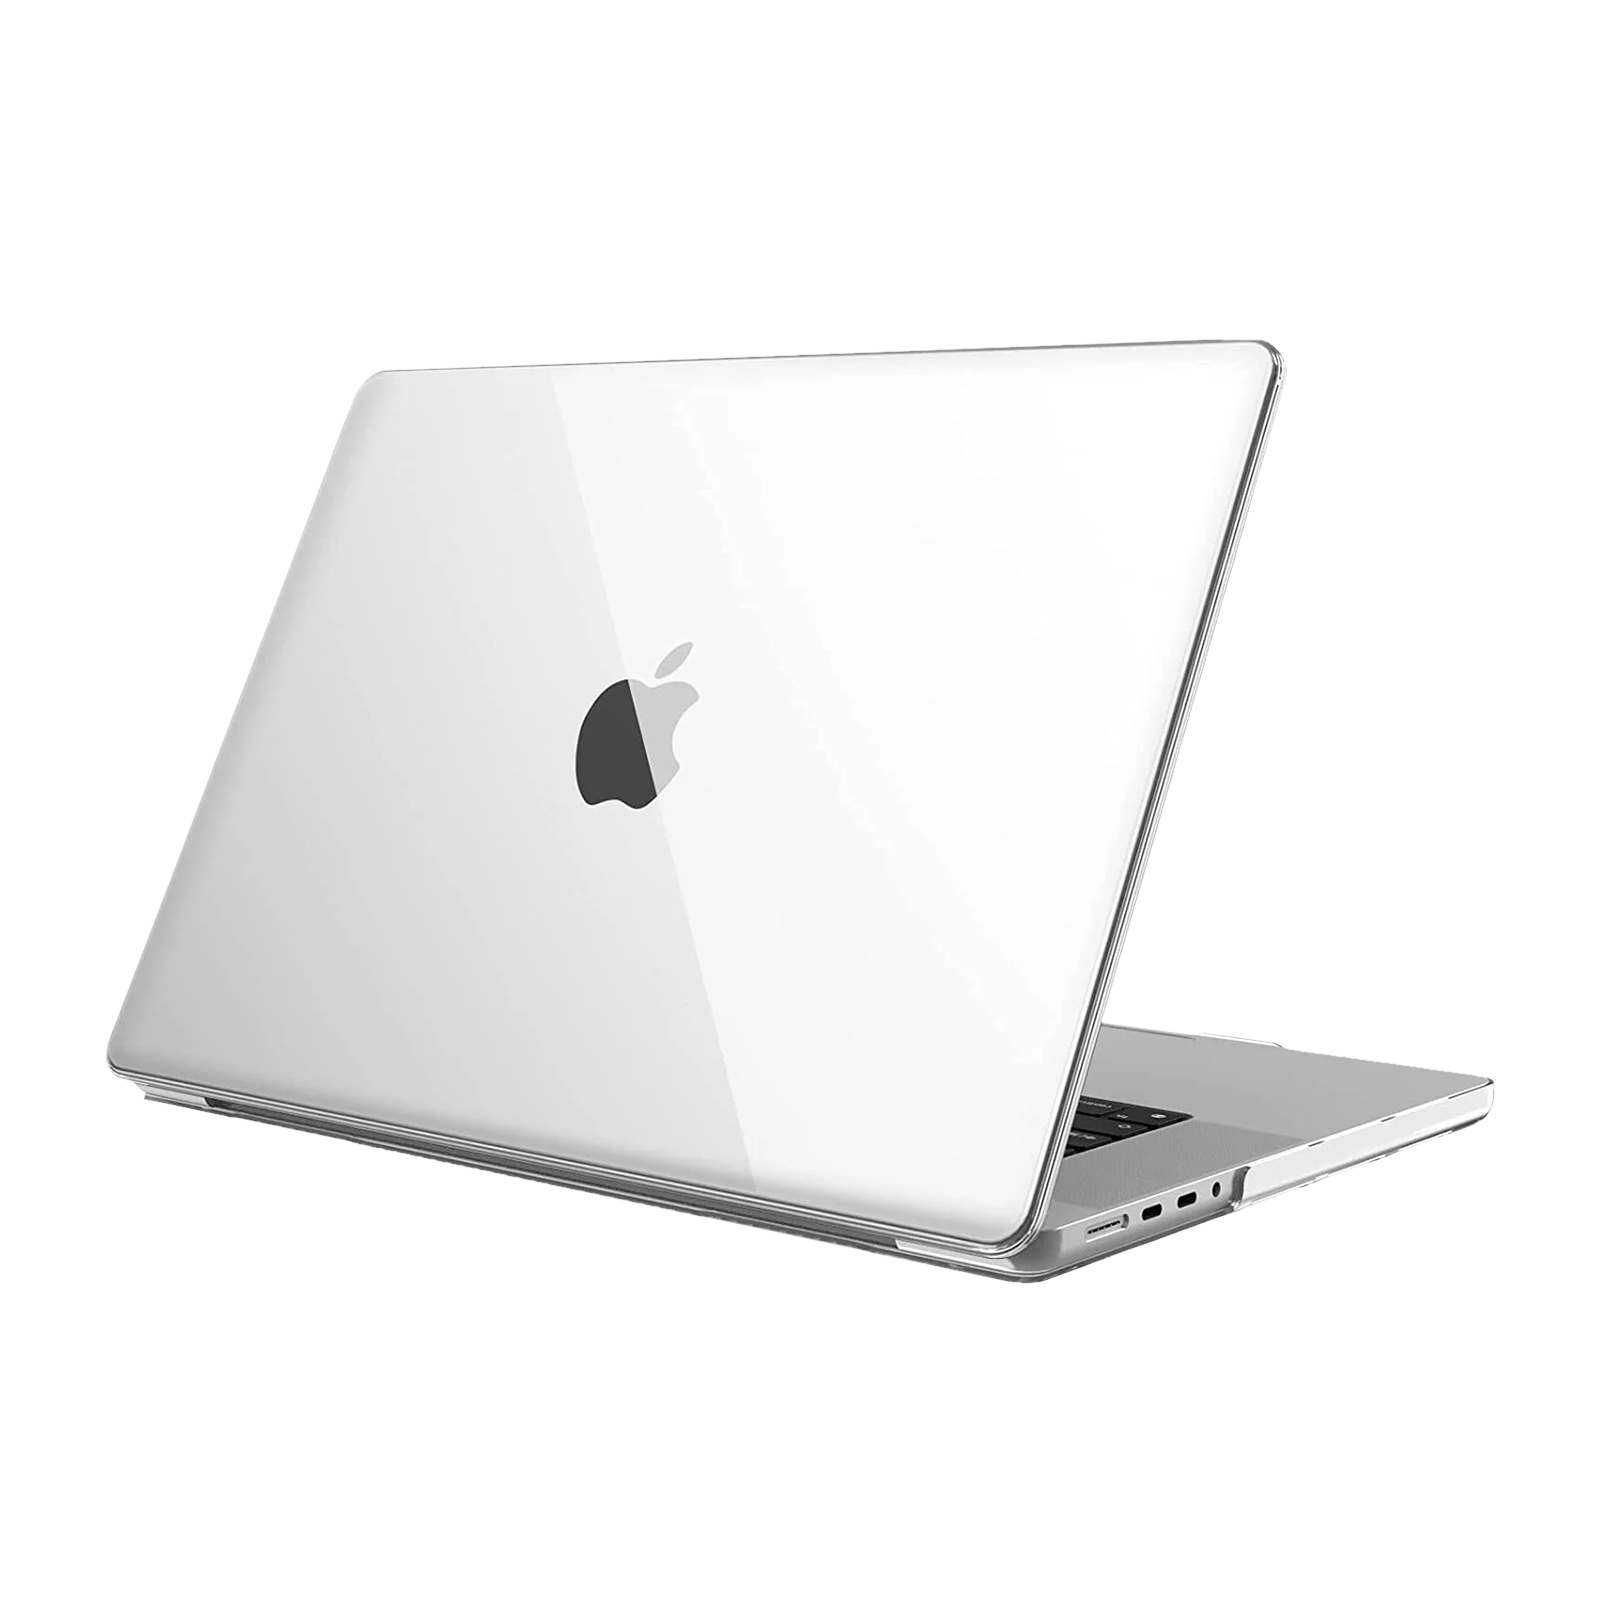 Vaku Luxos Glassinia Polycarbonate Hardshell Protective Case For MacBook Pro 16-Inch (Fully Vented, Clear)_2